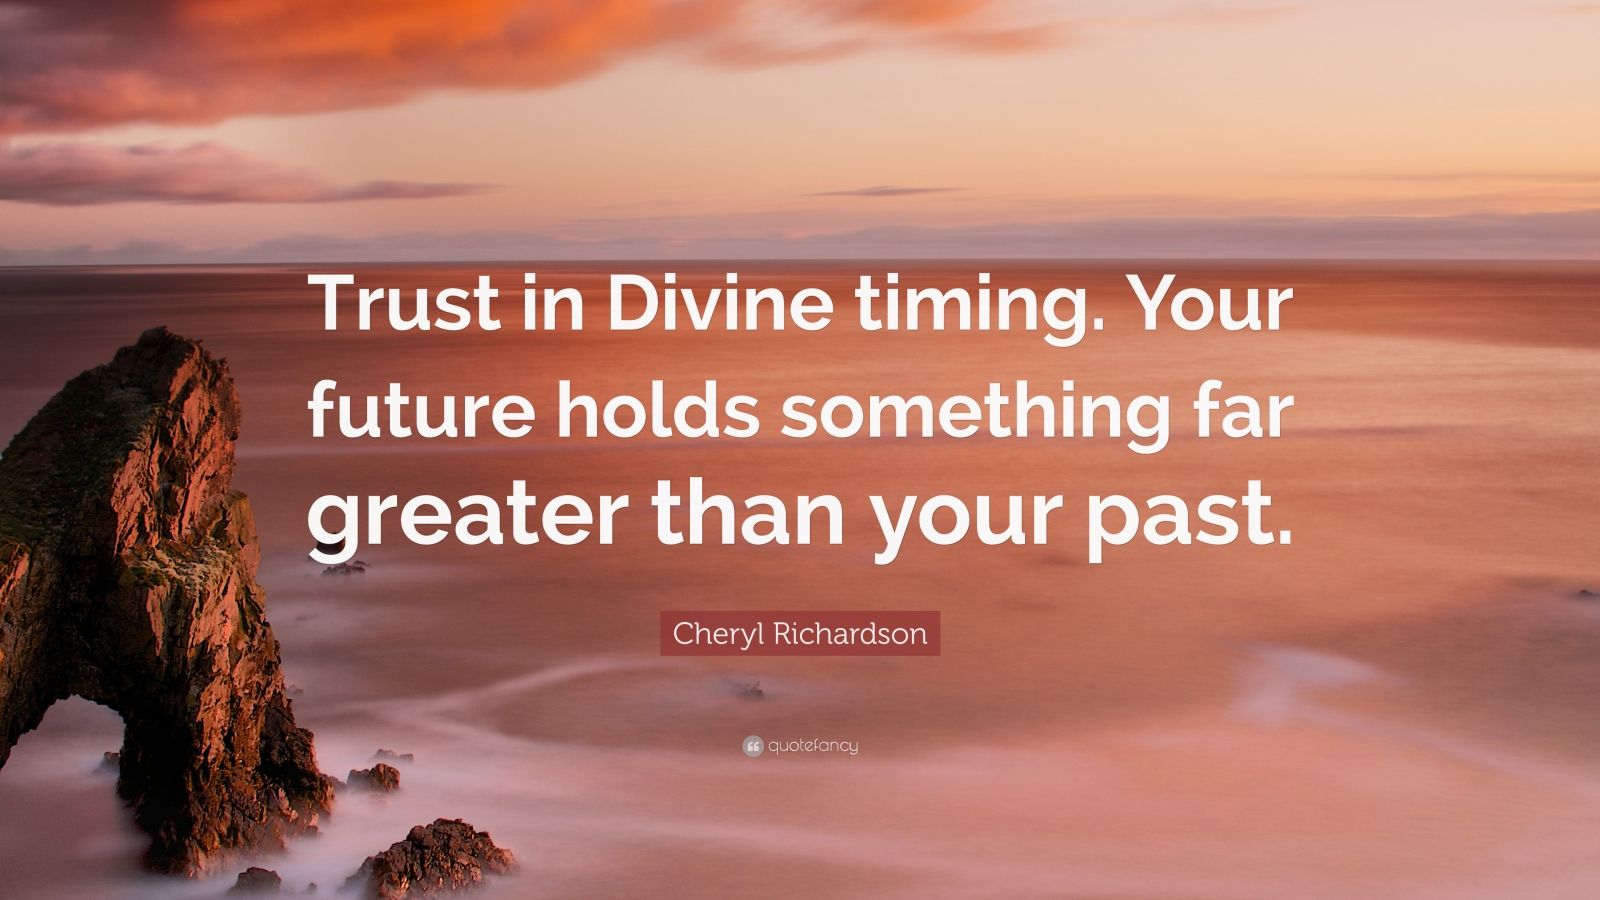 everything in divine timing